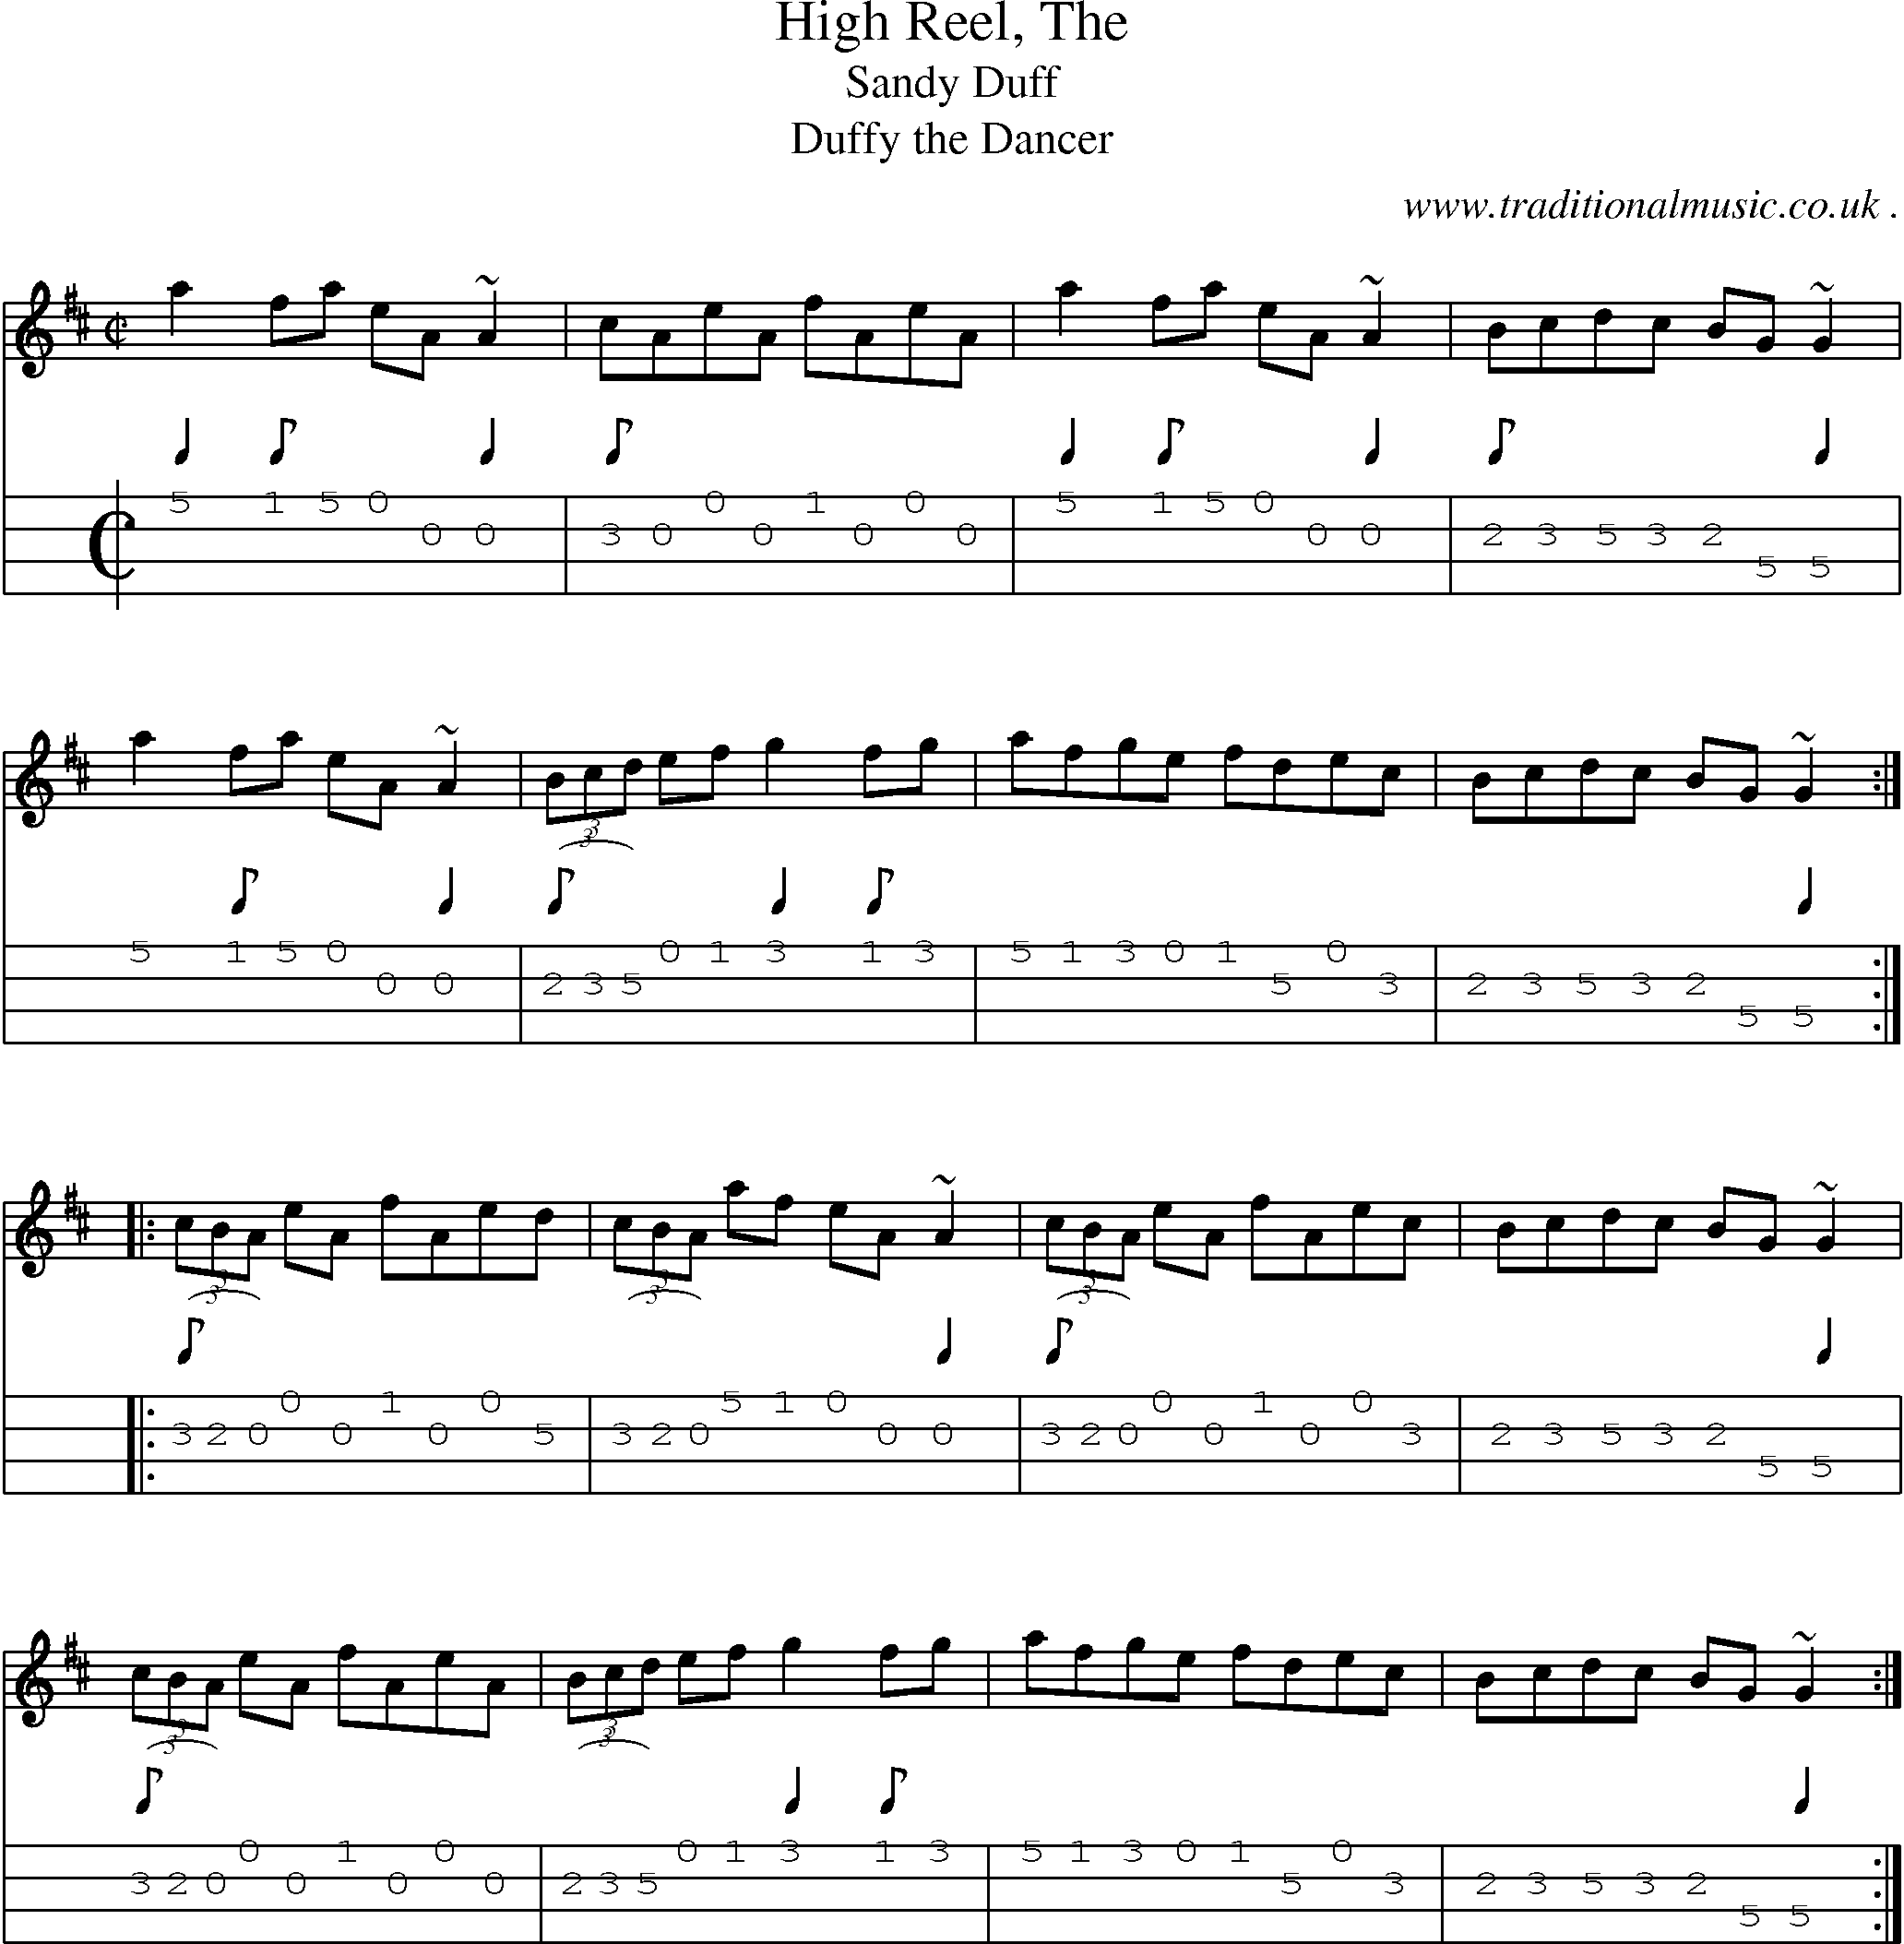 Sheet-music  score, Chords and Mandolin Tabs for High Reel The